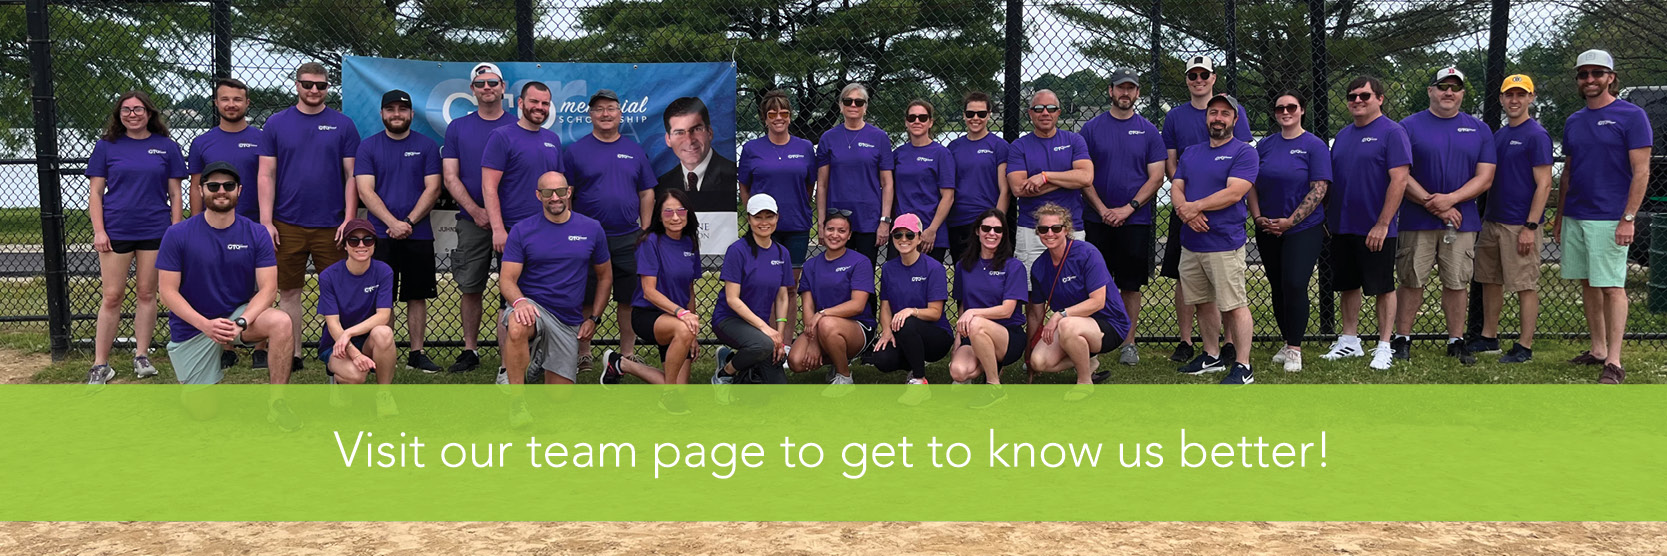 Team photo with Caption: Visit our team page to get to know us better